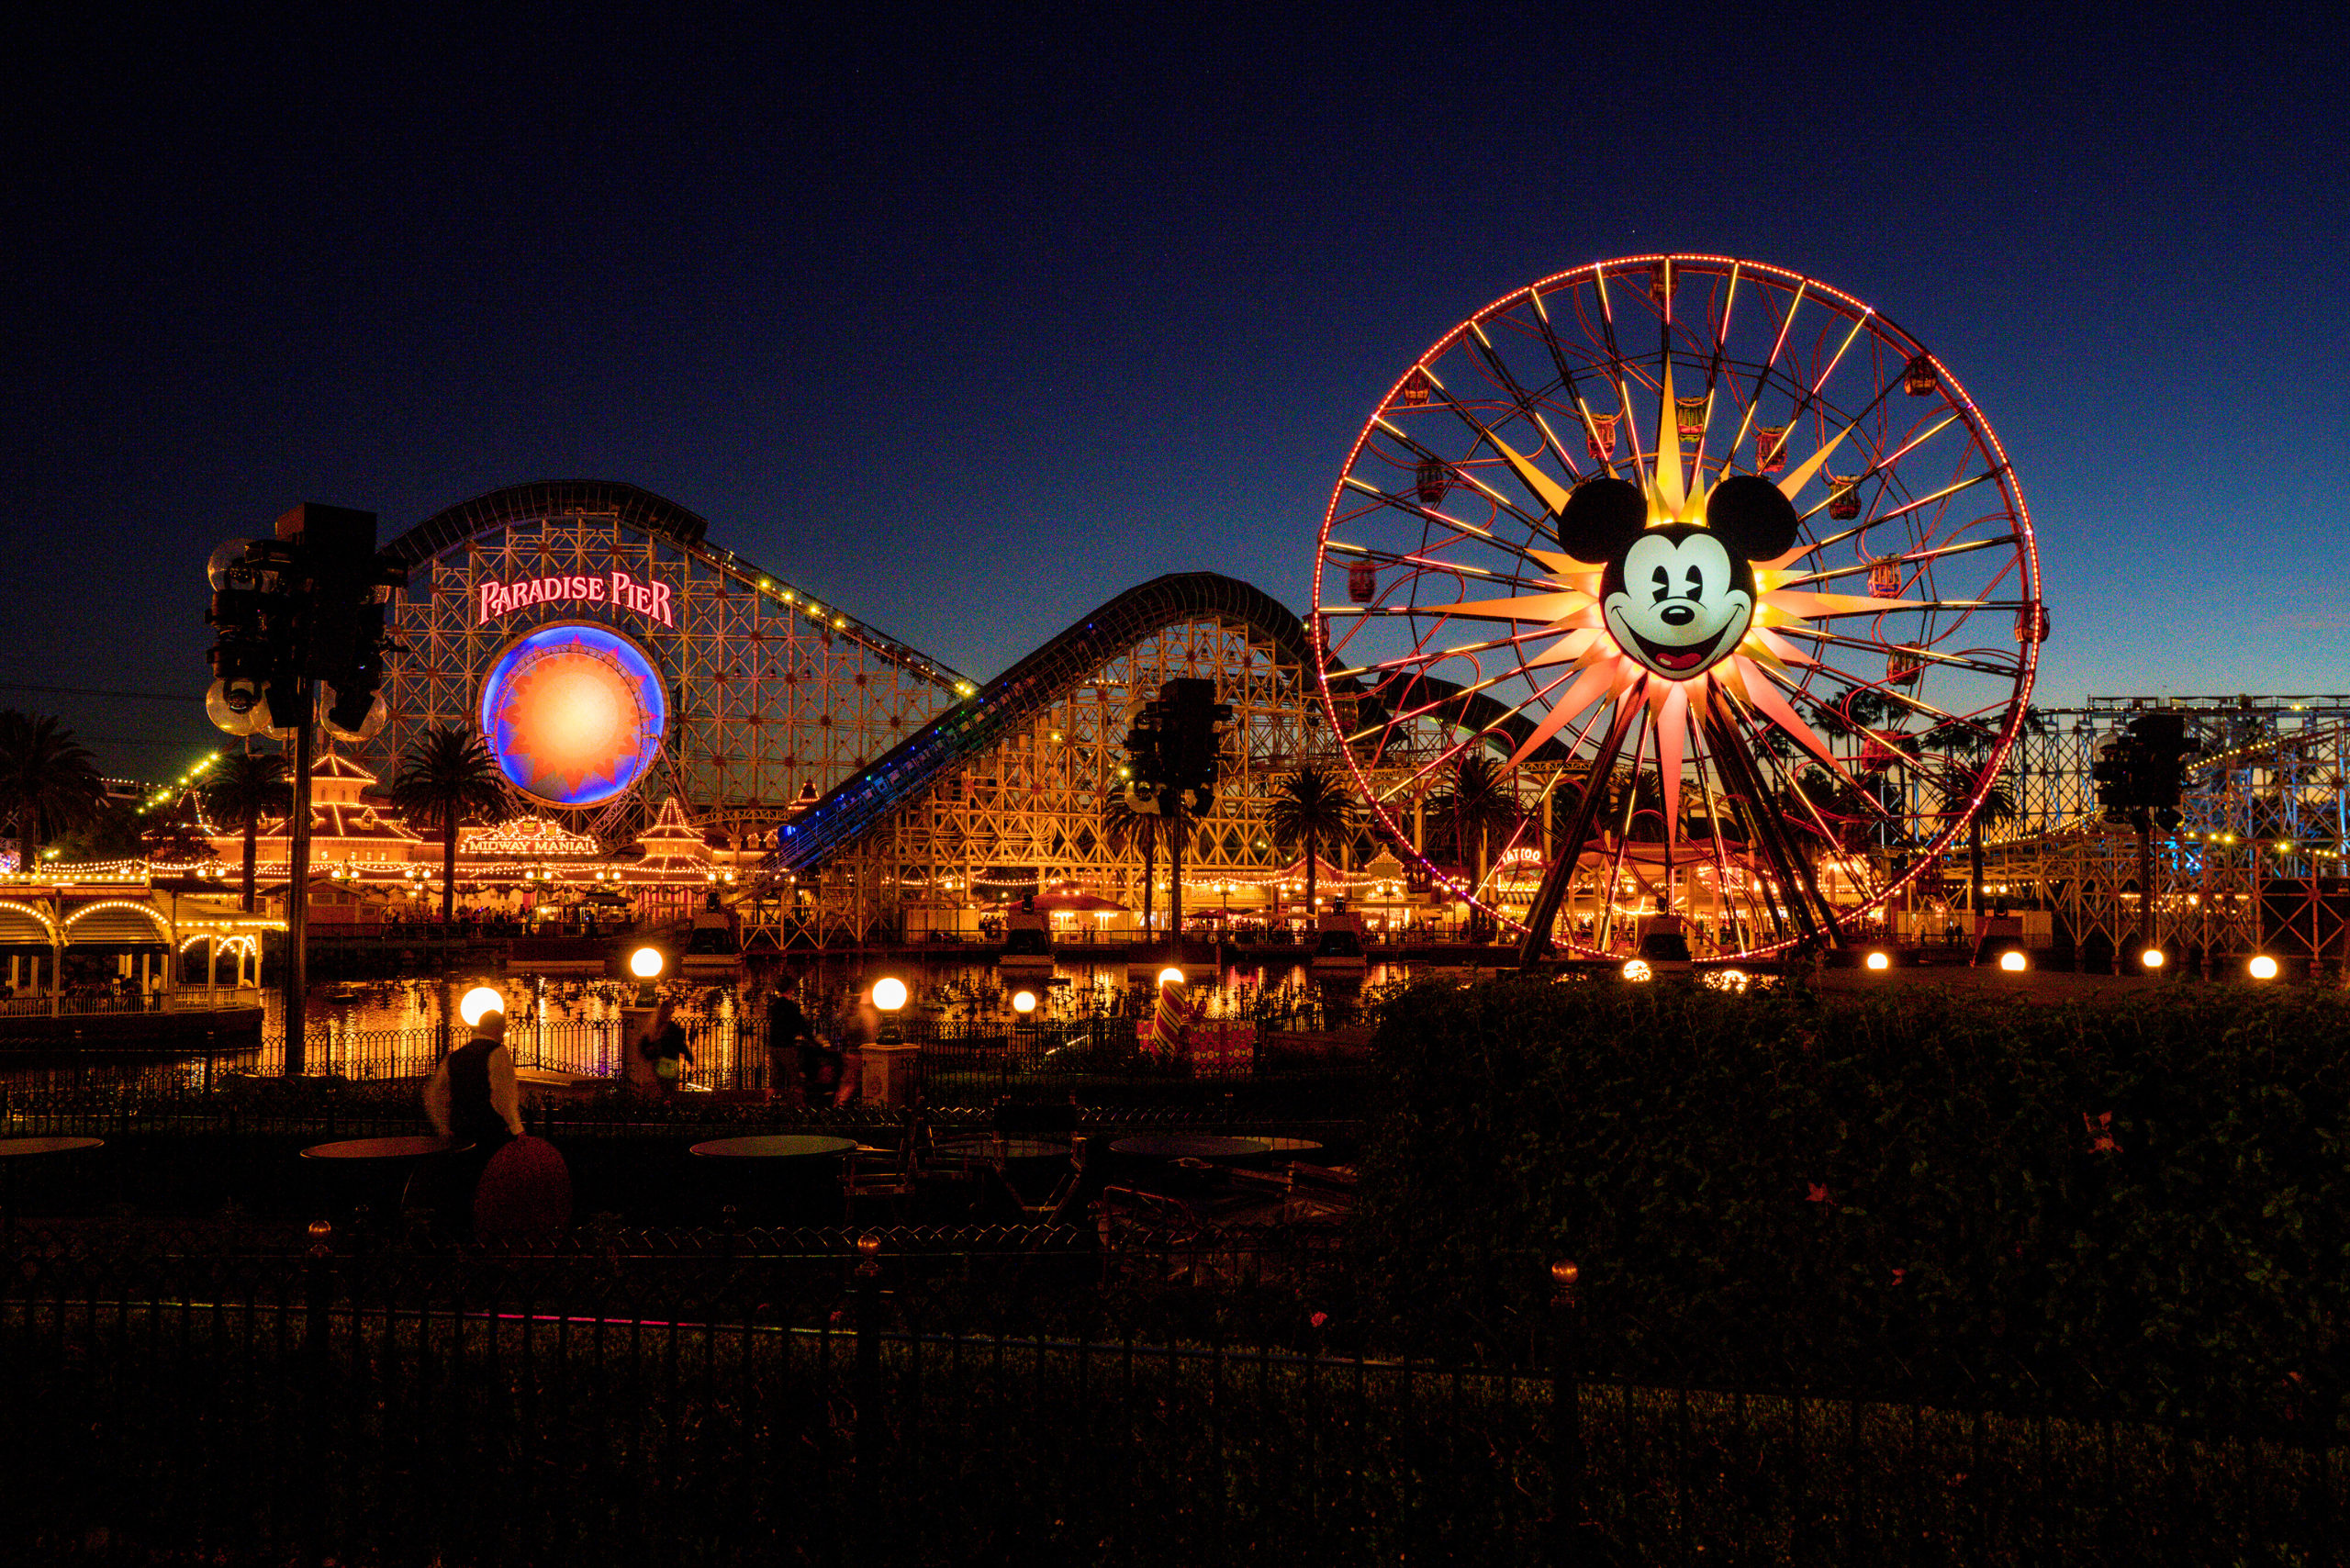 Experience your favorite Disney rides "virtually" with YouTube!